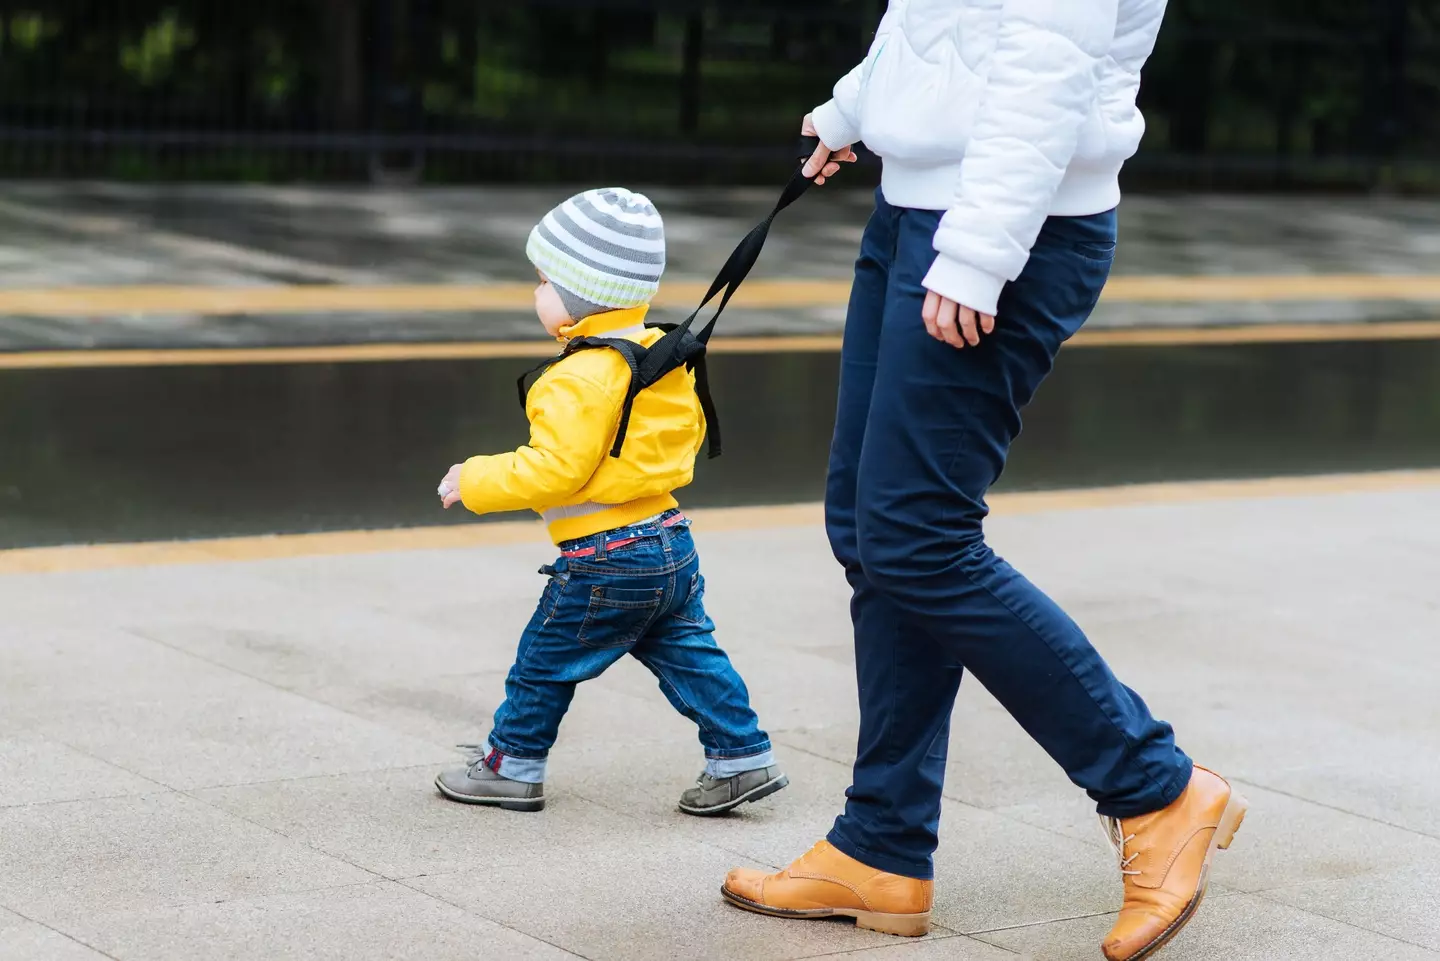 One mum recently went viral after revealing that she keeps her kid on a leash when out and about in public.